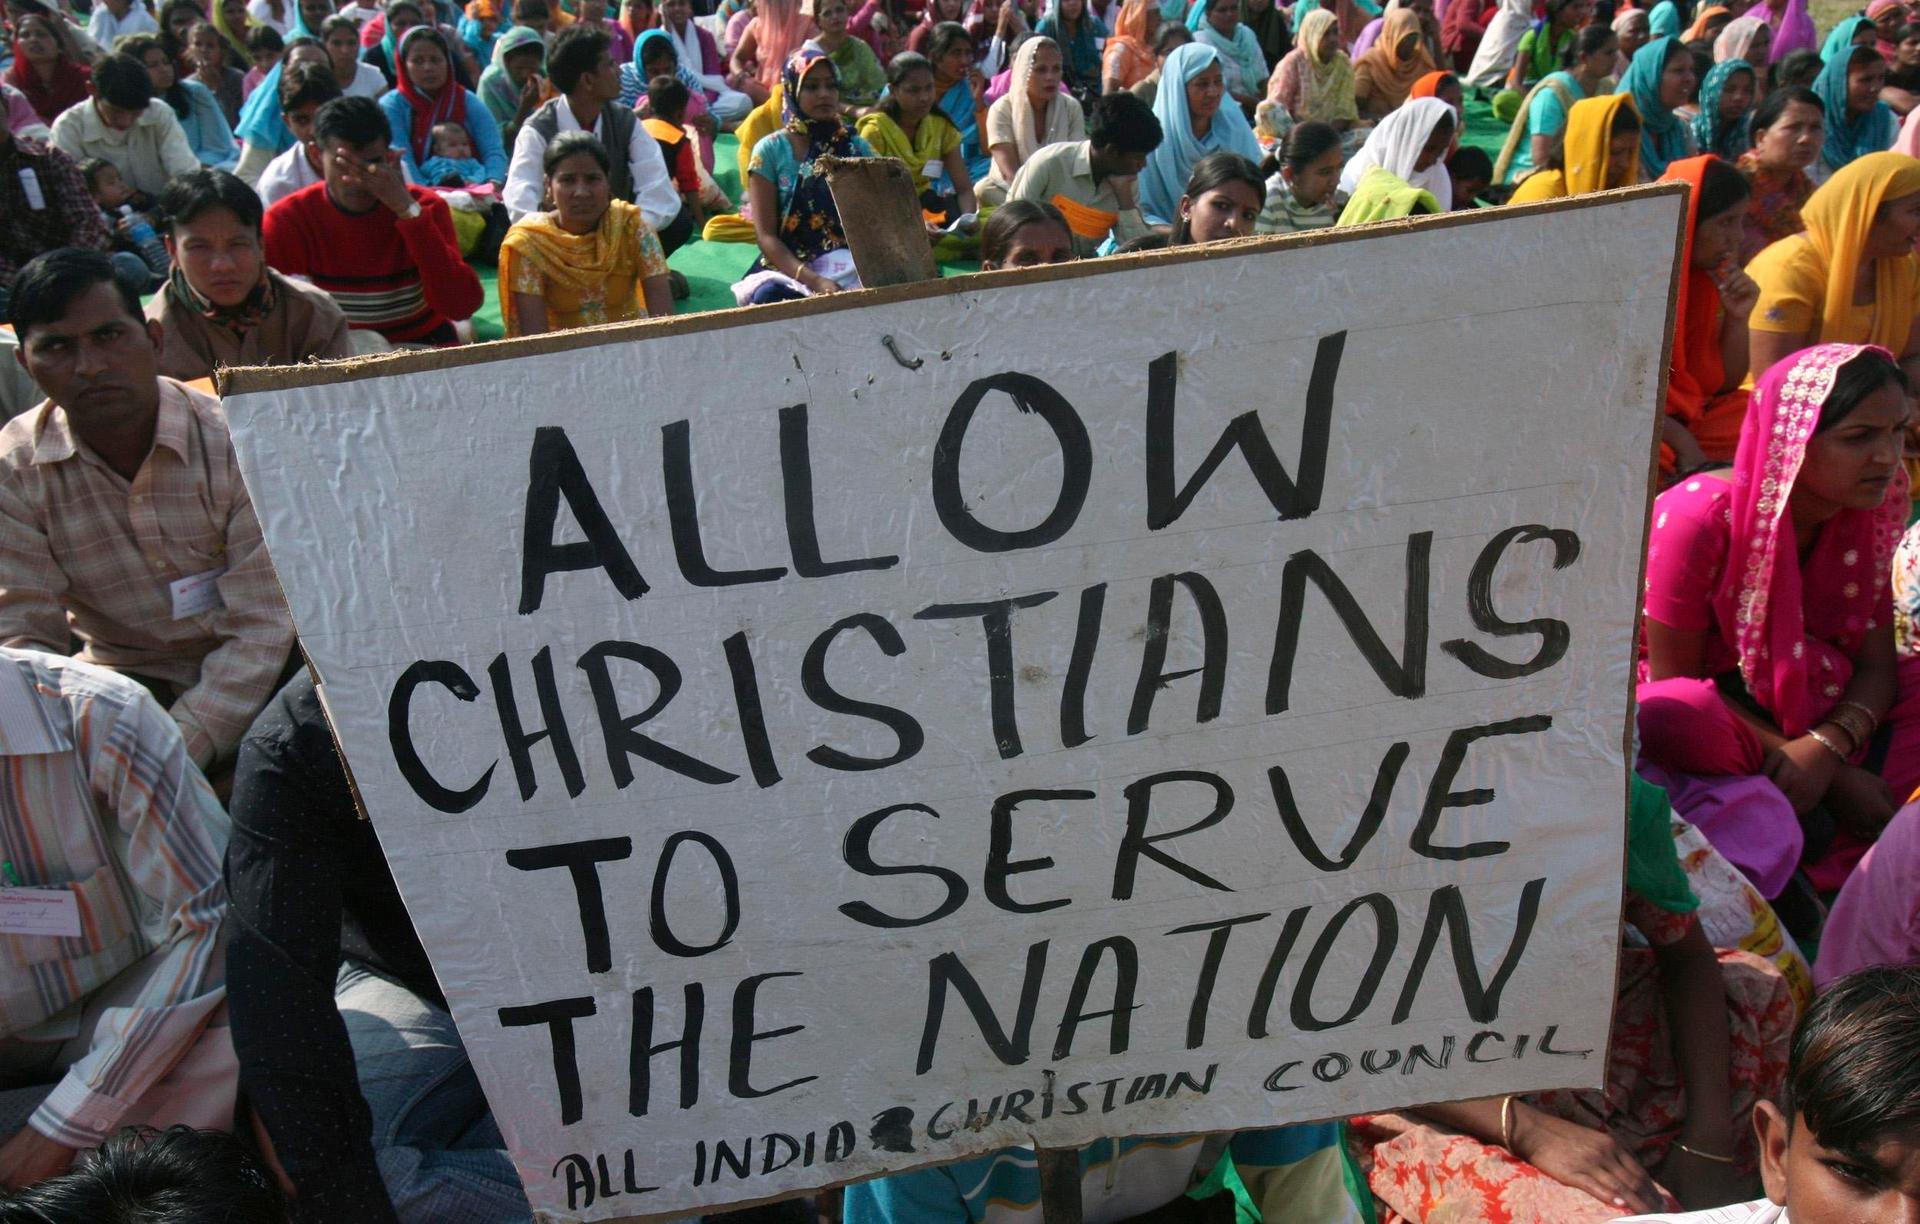 To protect minorities, prominent Indians want end to anti-conversion laws